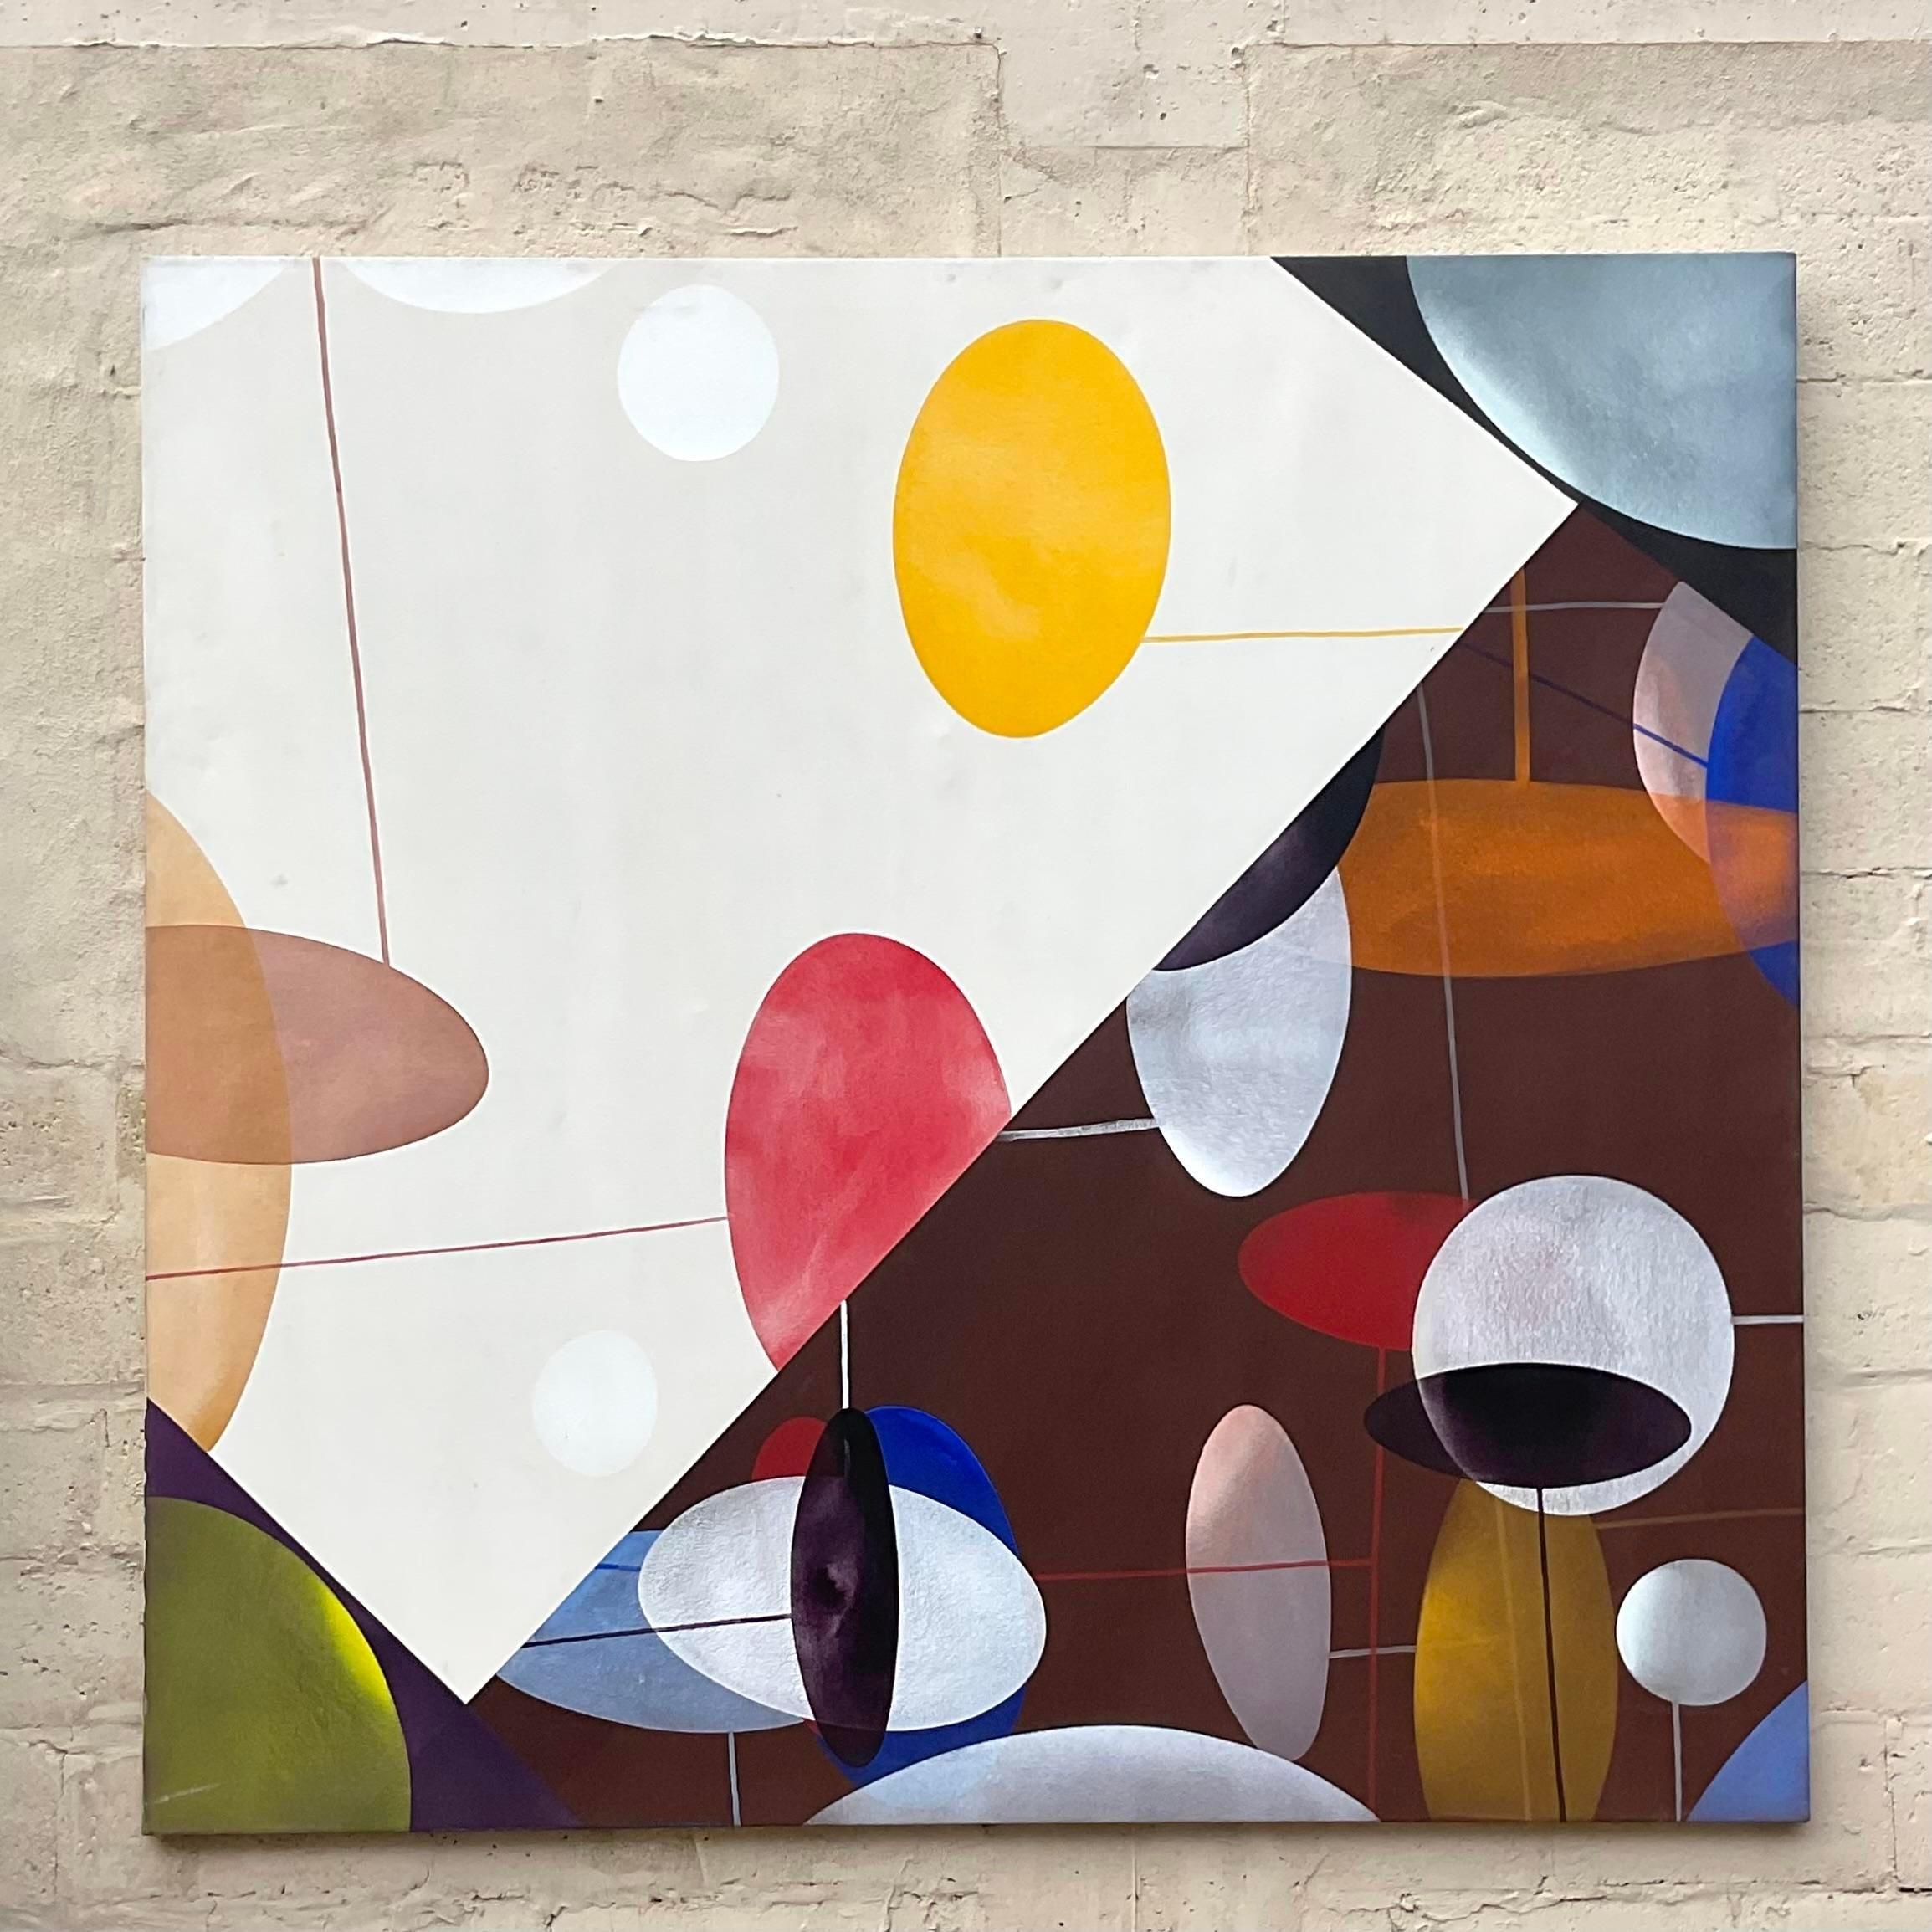 Step into the vibrant spirit of the 1980s with this Vintage Boho Original Oil On Canvas. Featuring abstract geometric patterns, this piece embodies the era's artistic energy with an American twist, making it a timeless addition to your collection